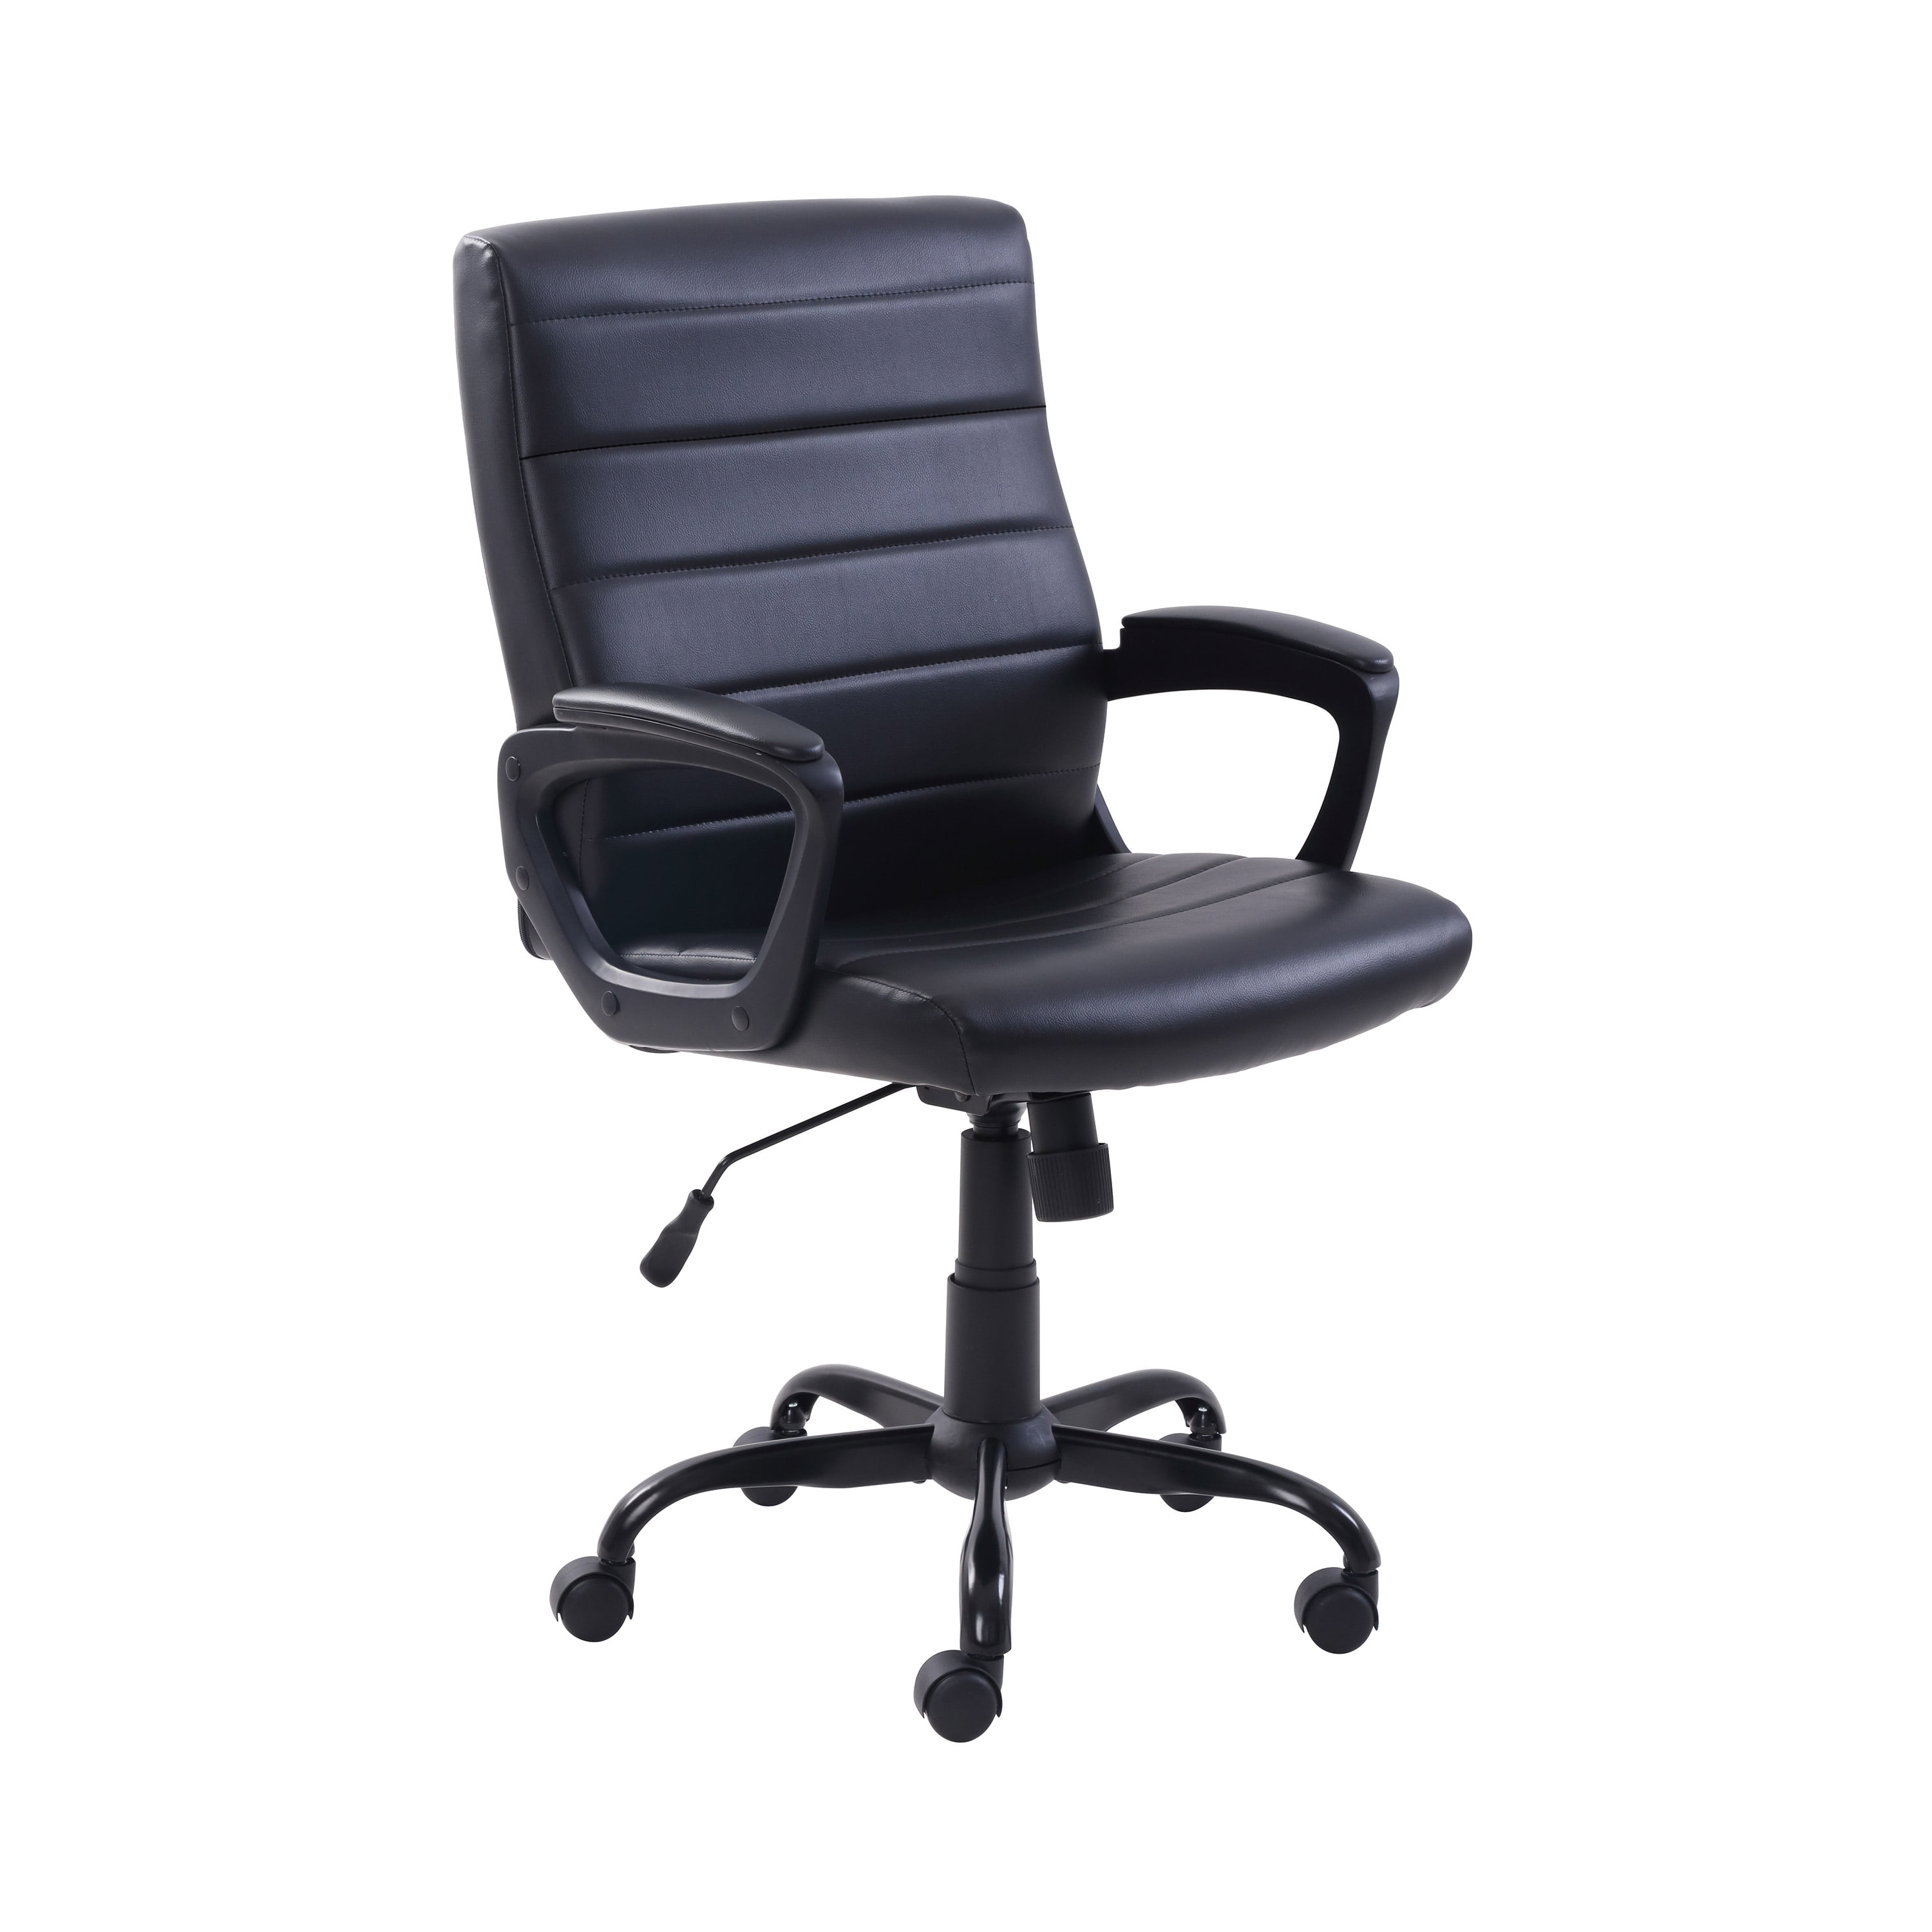 Mainstays Bonded Leather Mid Back Manager S Office Chair Black Walmart Com Walmart Com